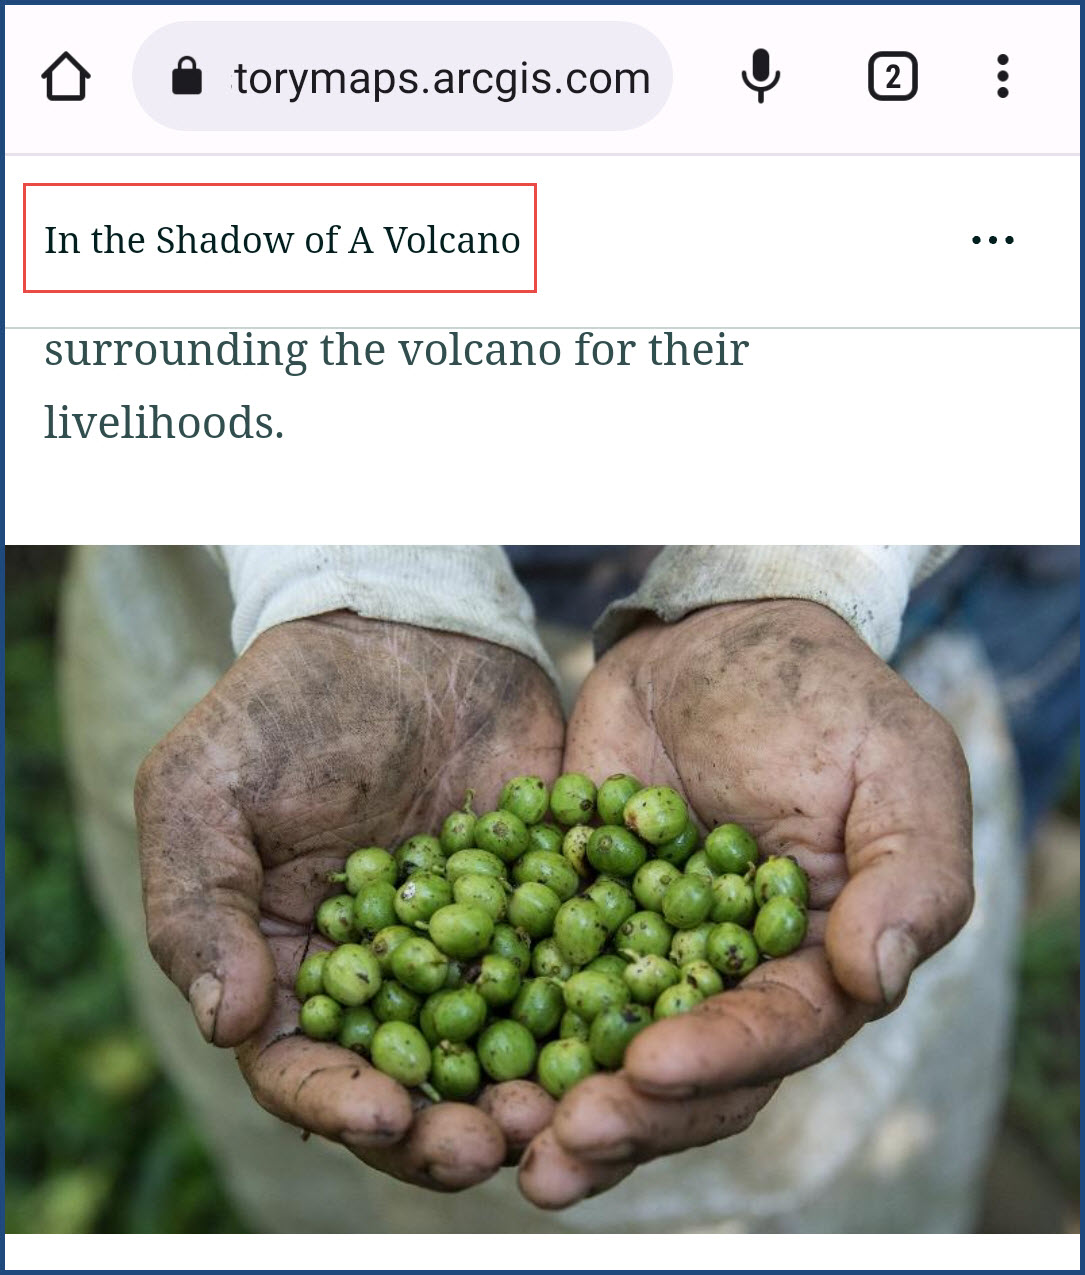 The header of the 'In The shadow of A Volcano' story